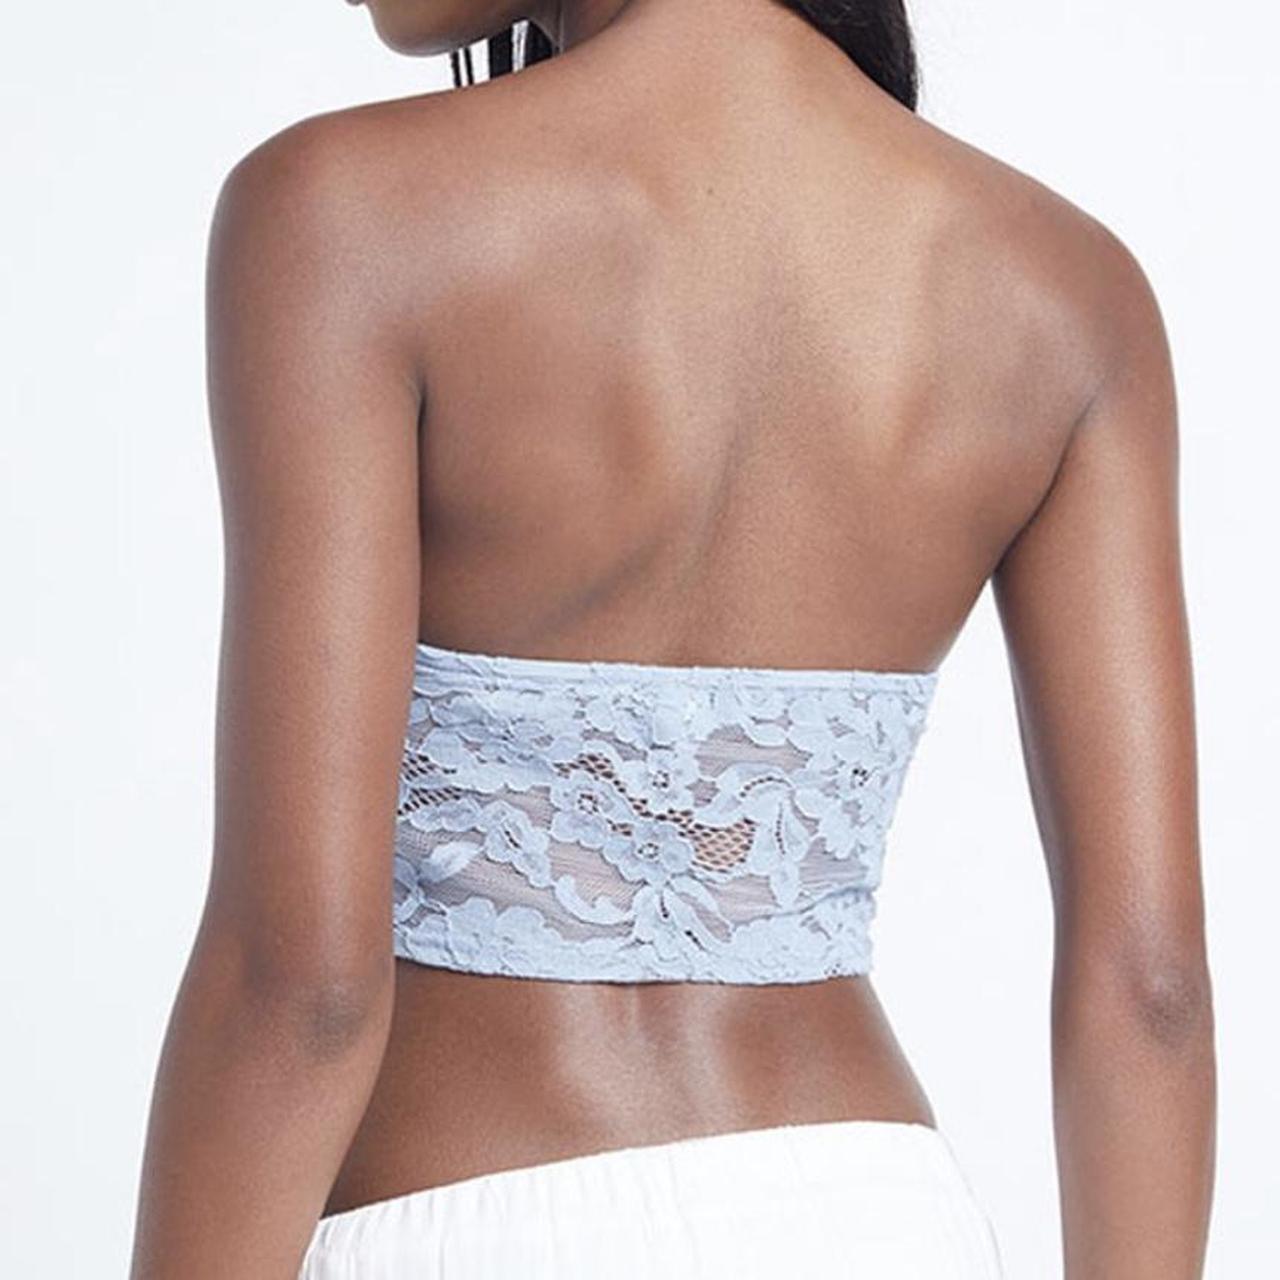 Kendall & Kylie Strapless Lace Corset Top